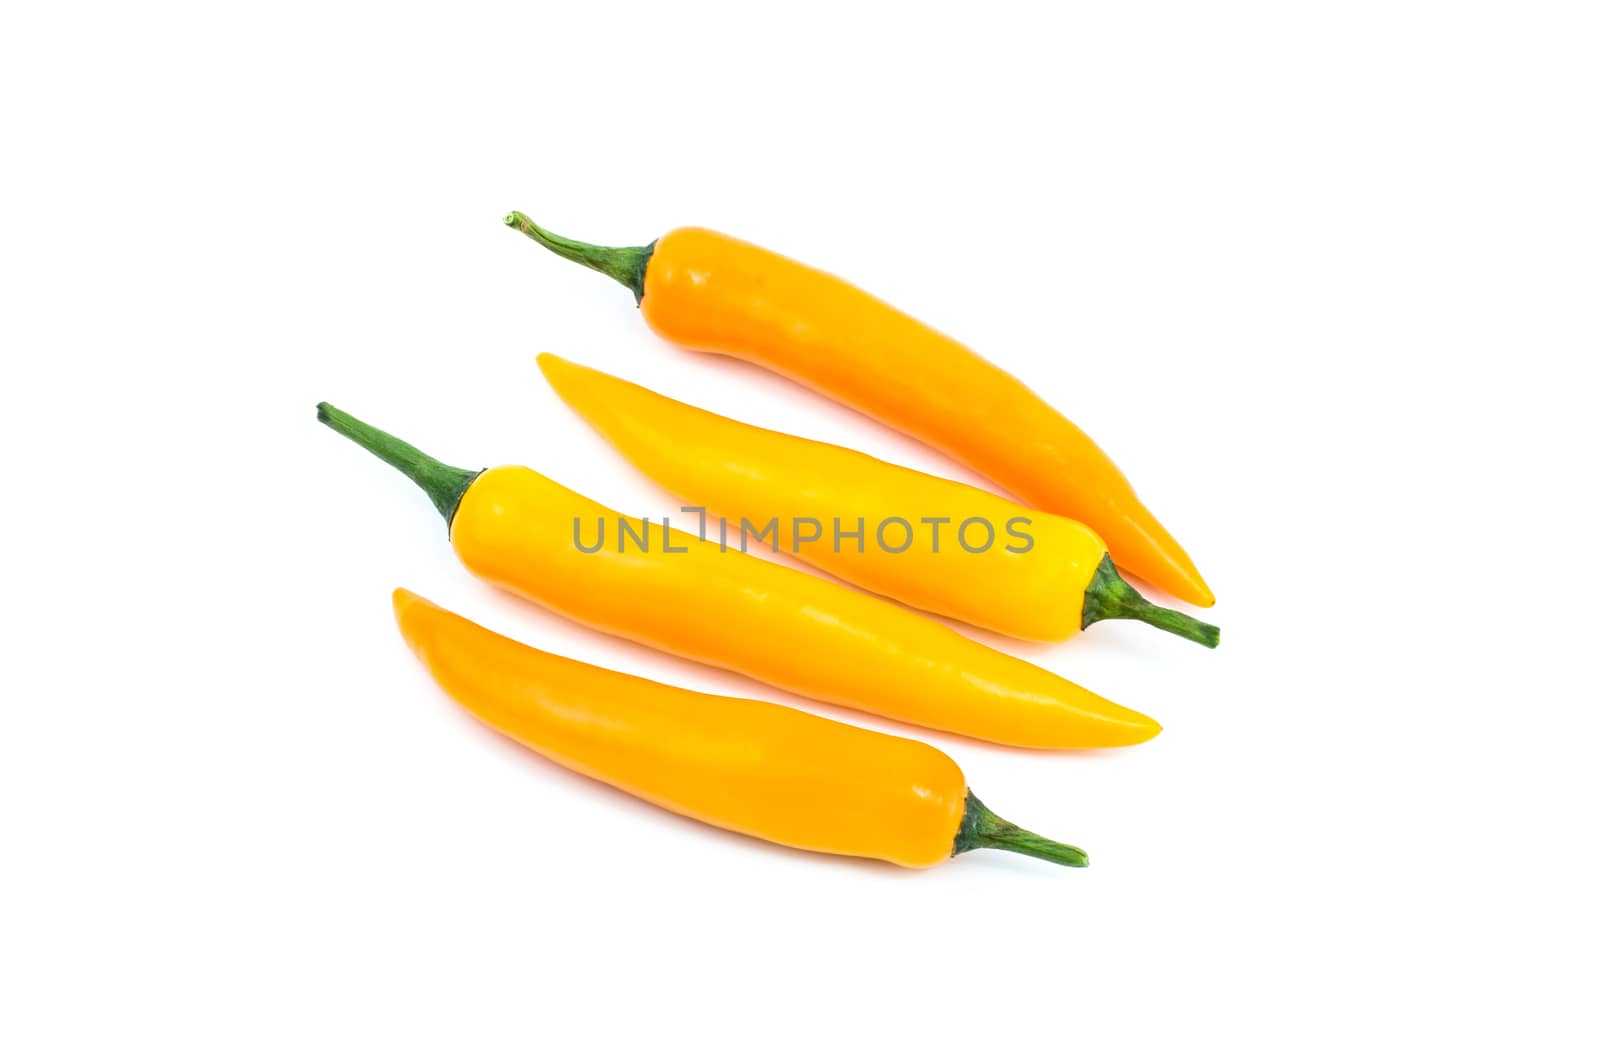 Yellow chilli pepper isolated on white background.